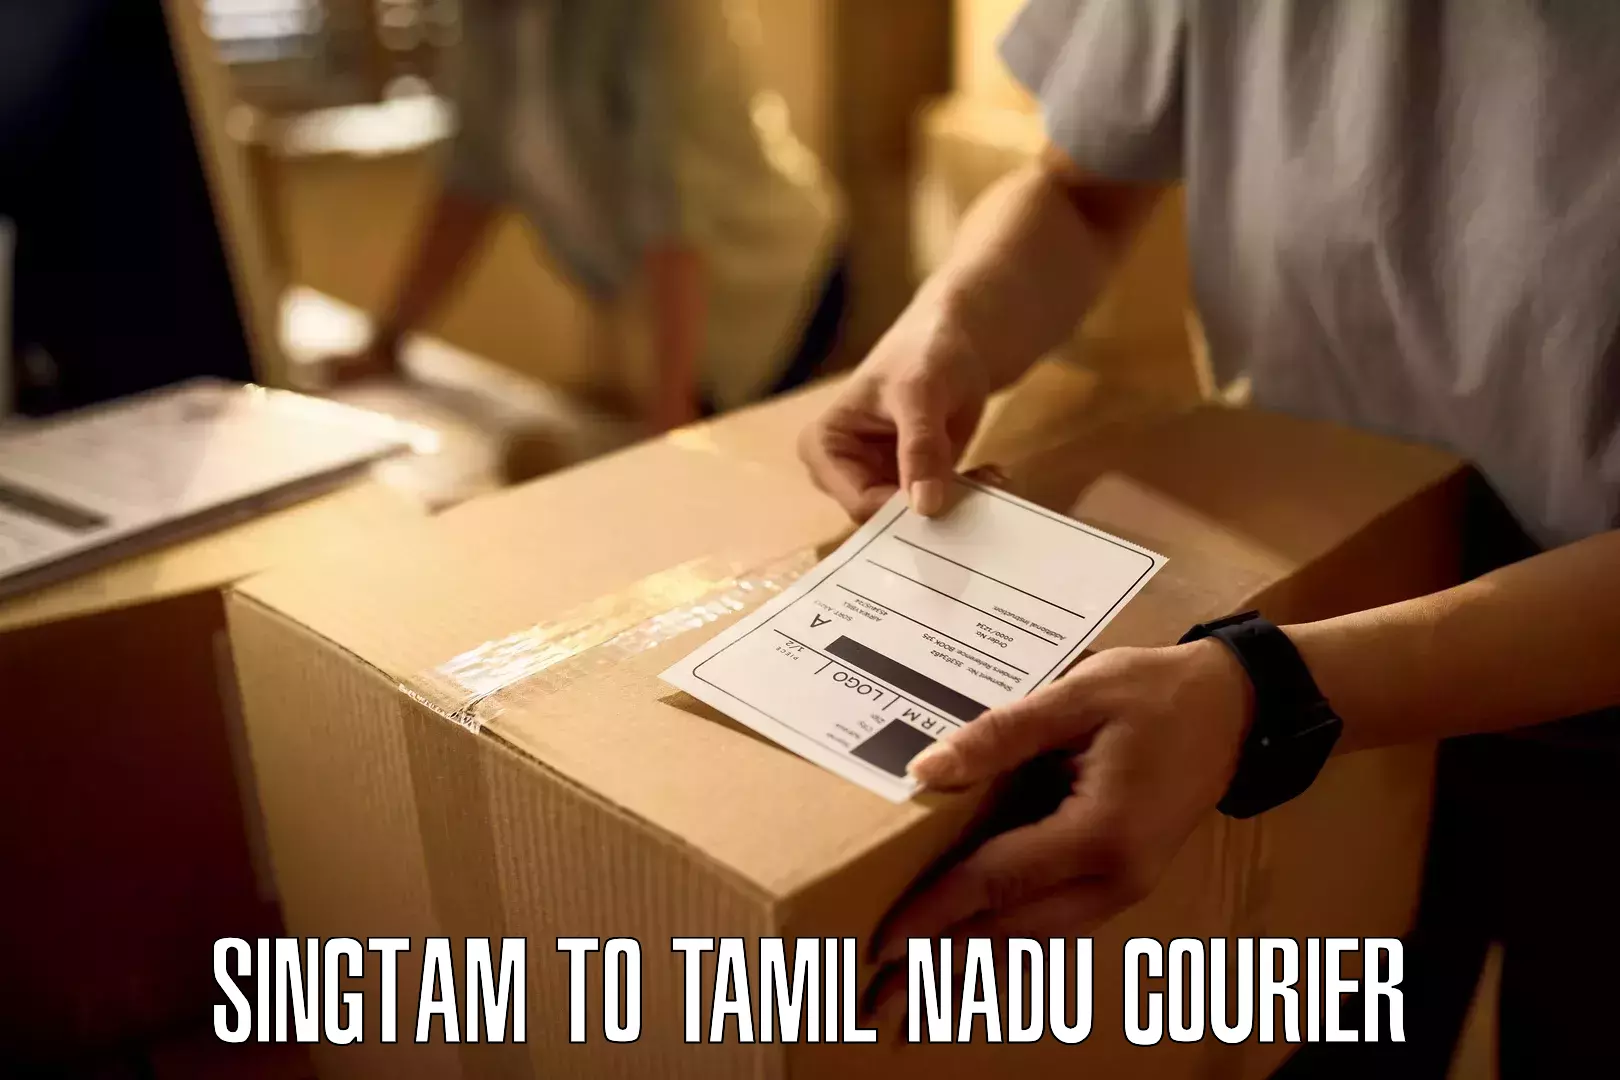 Reliable shipping partners Singtam to Tamil Nadu